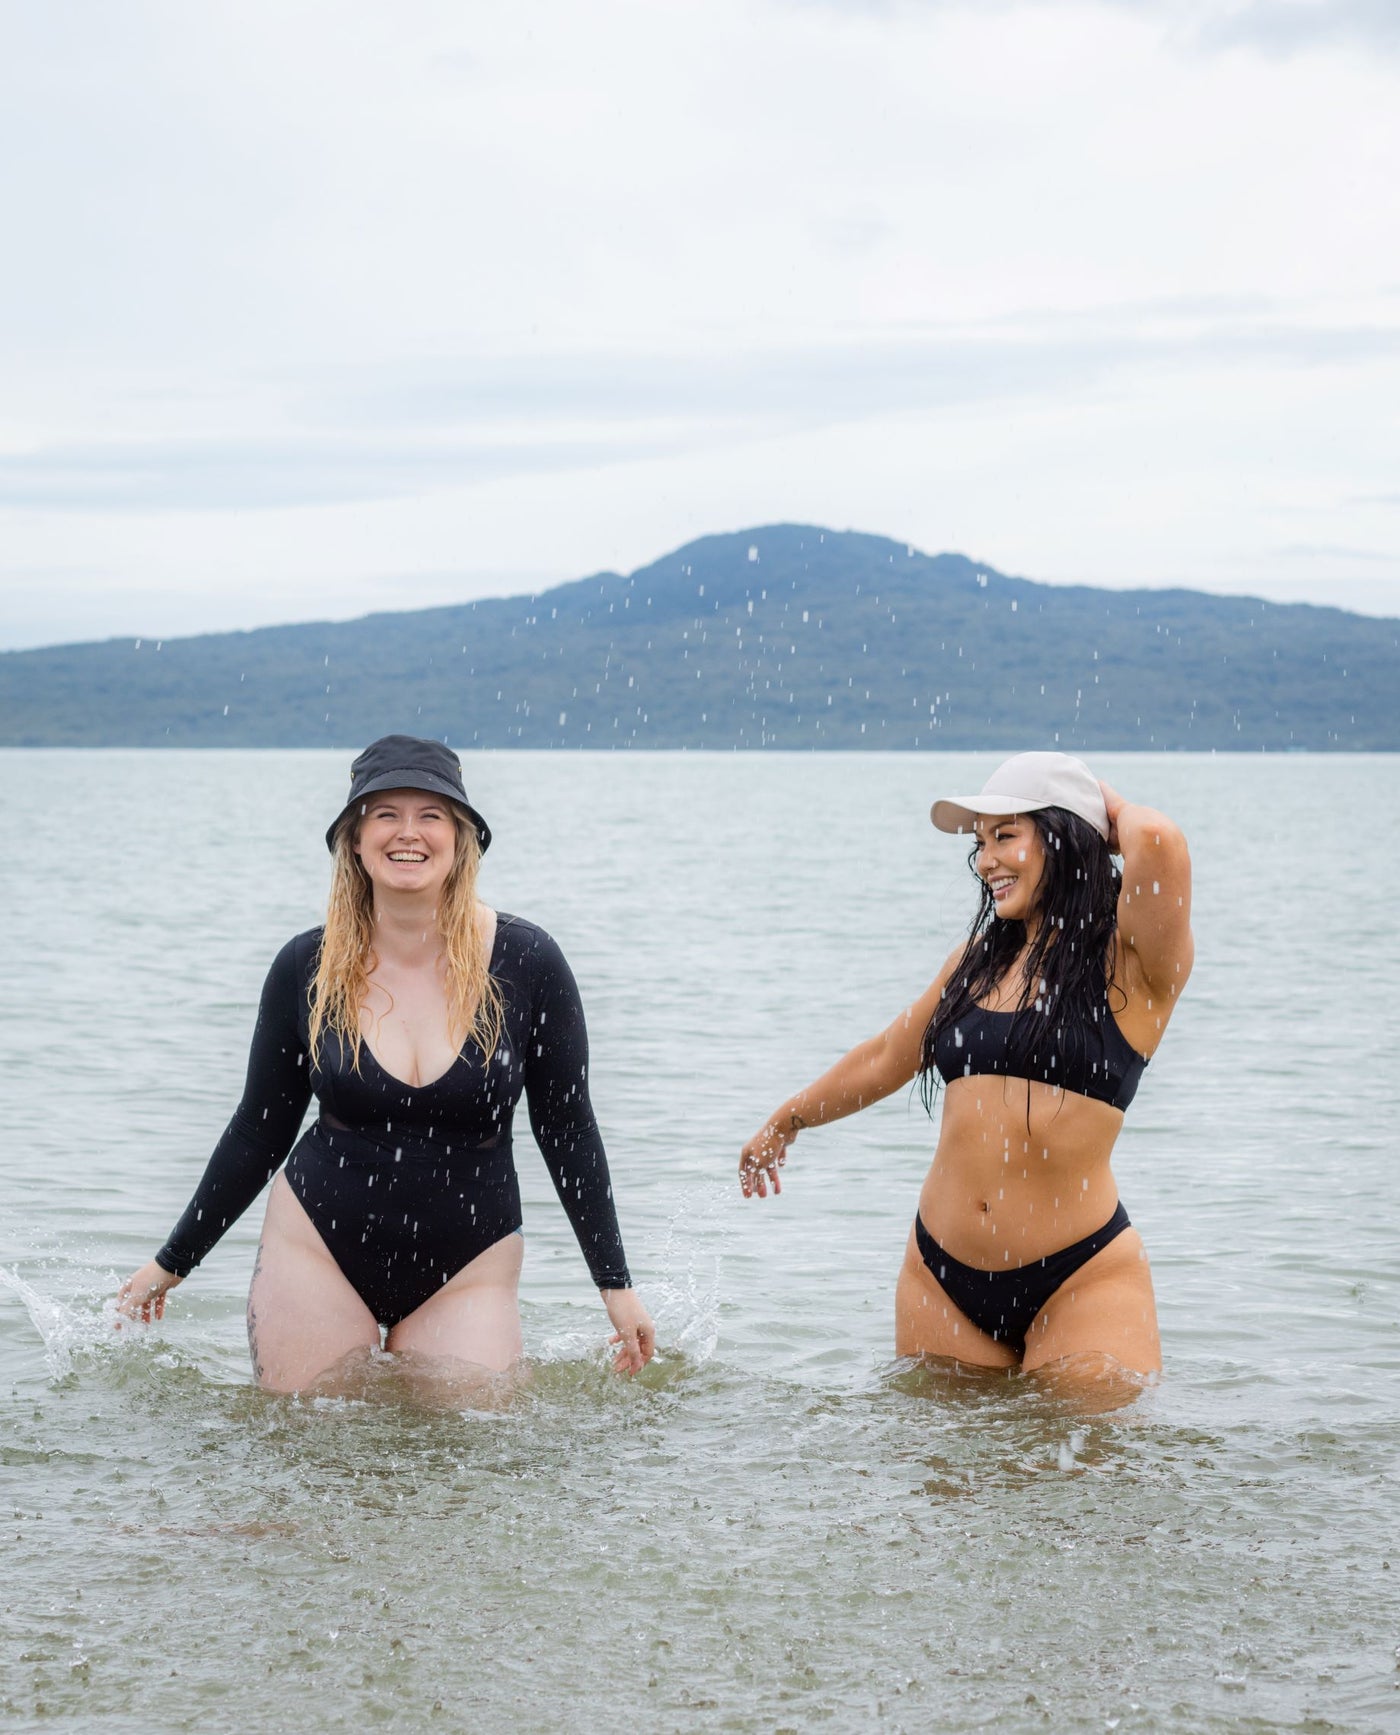 SWMR The Dip paddle suit at the beach with another model in a SWMR black bikini